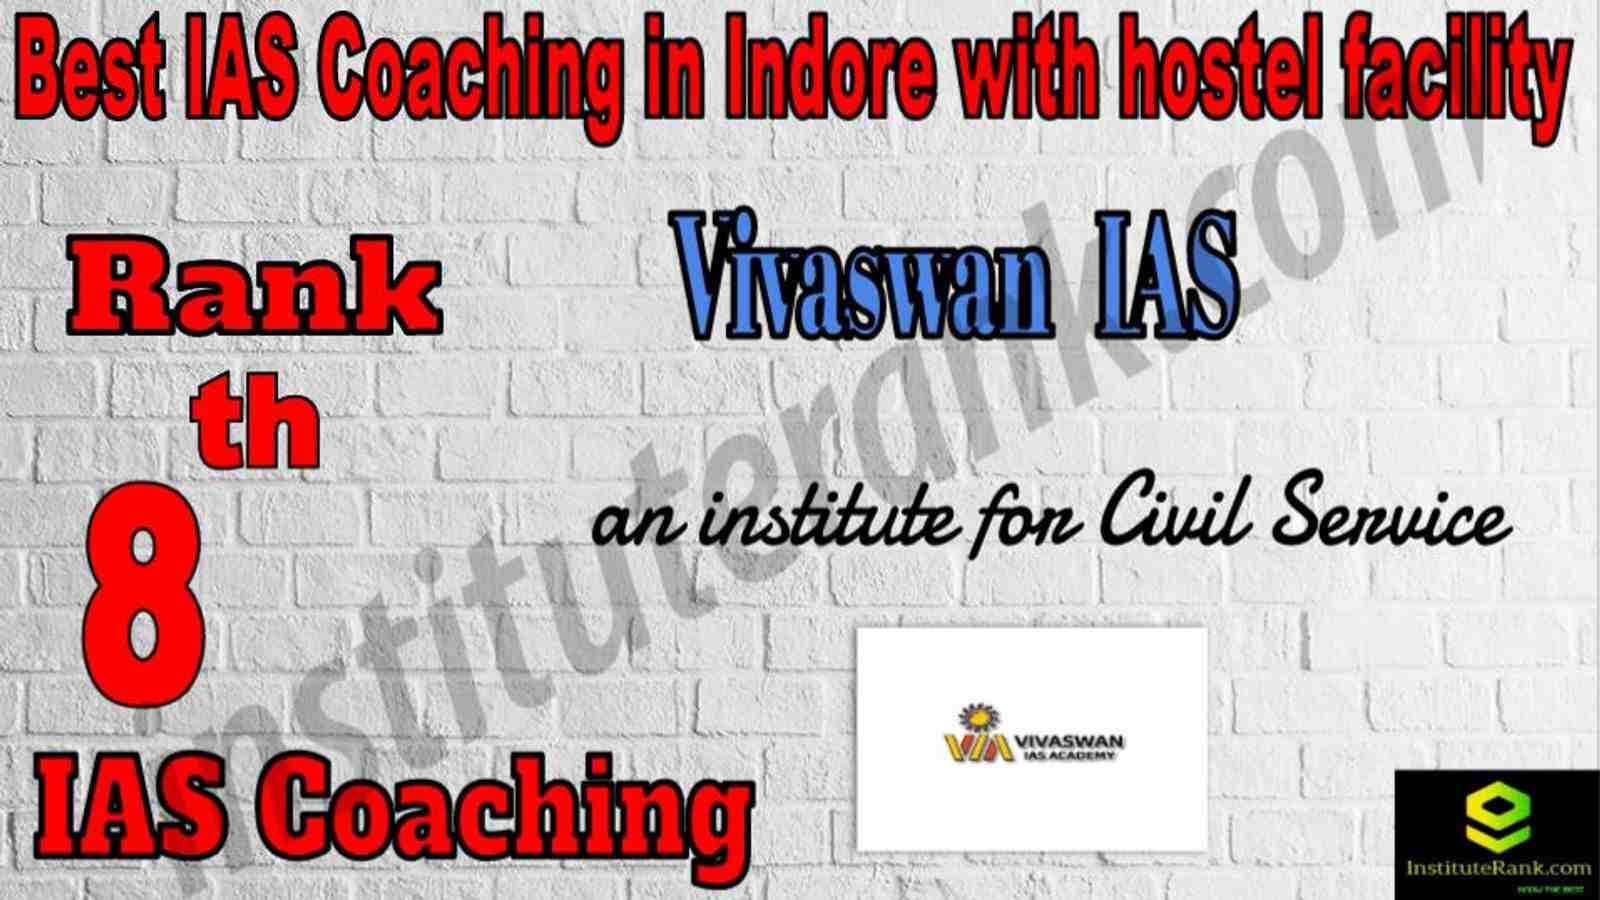 8th Best IAS Coaching in Indore with hostel Facility